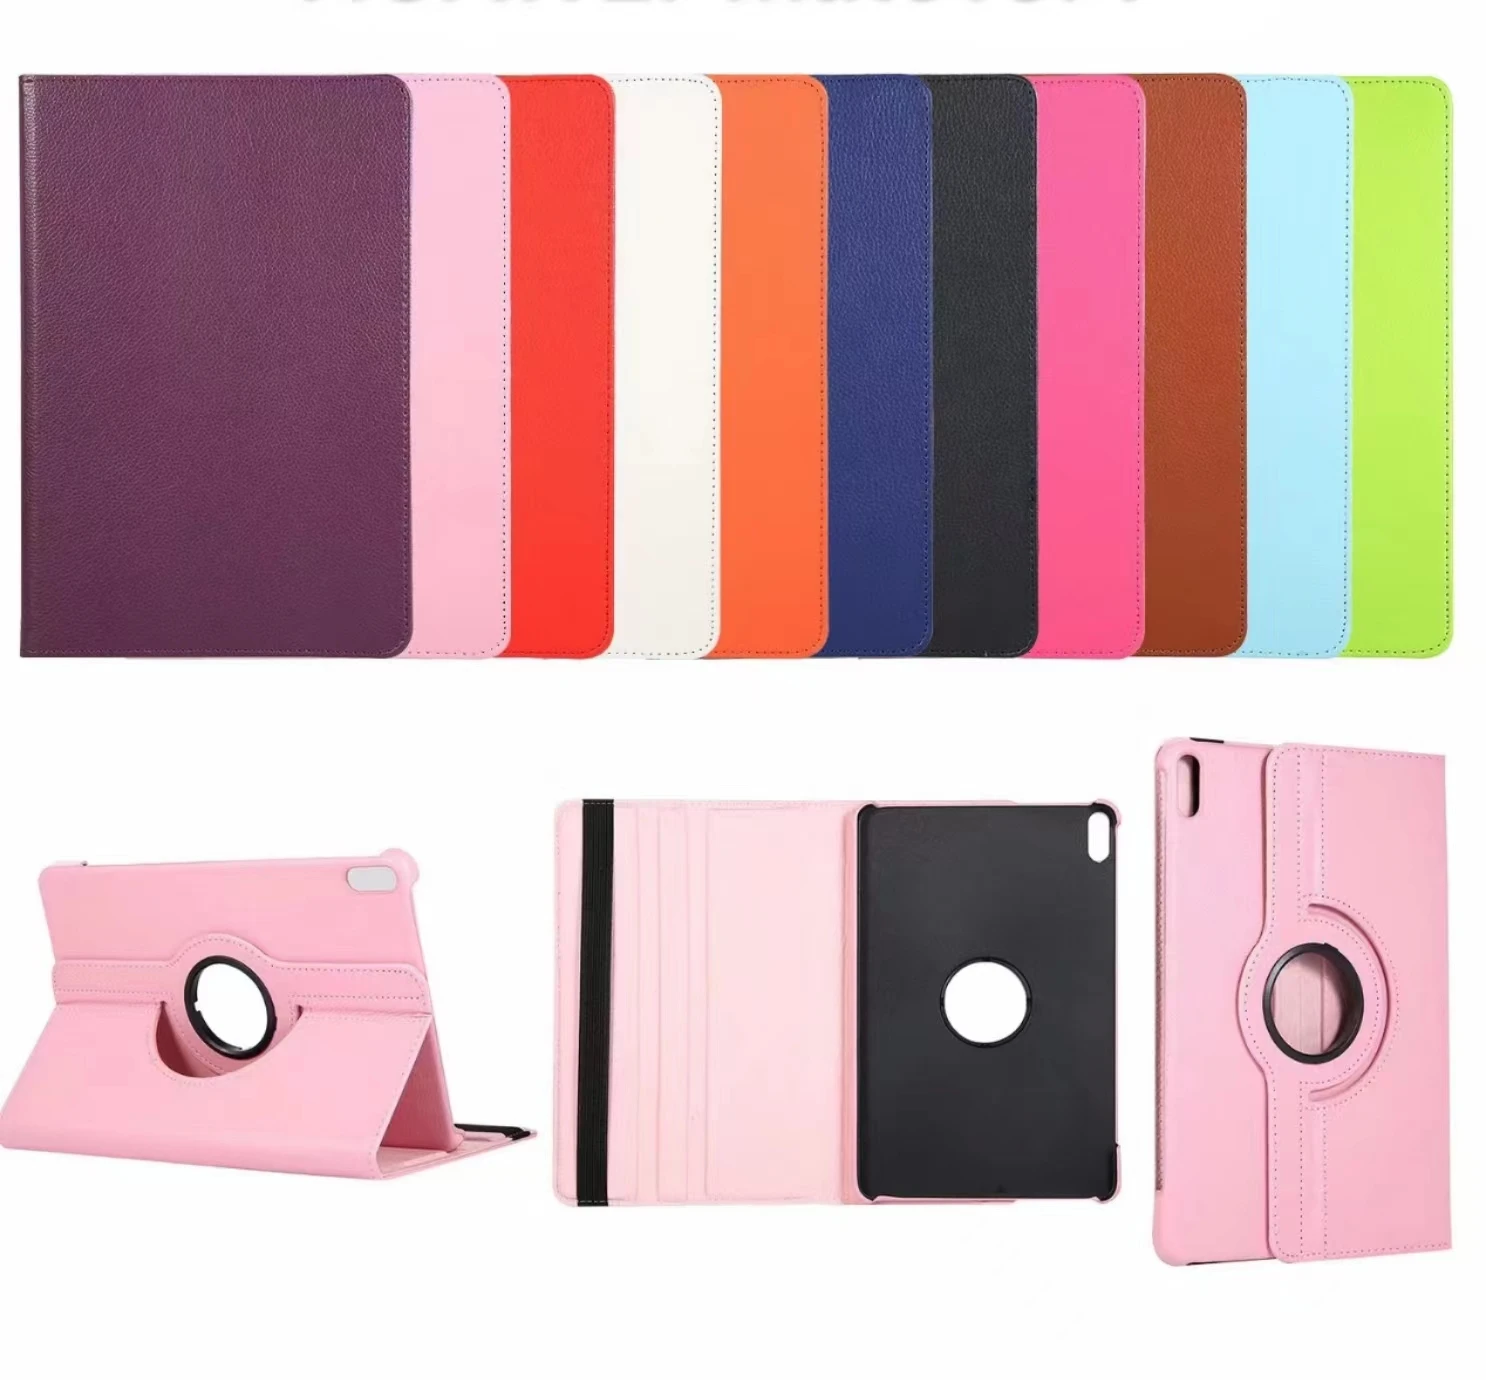 

360 Rotate Case For Huawei MatePad Pro 10.4 2022 2020 PU Leather Tablet Cover Honor V6 10.4 T8 8.0 2020 C3 8.0 2020 Enjoy 2 10.1